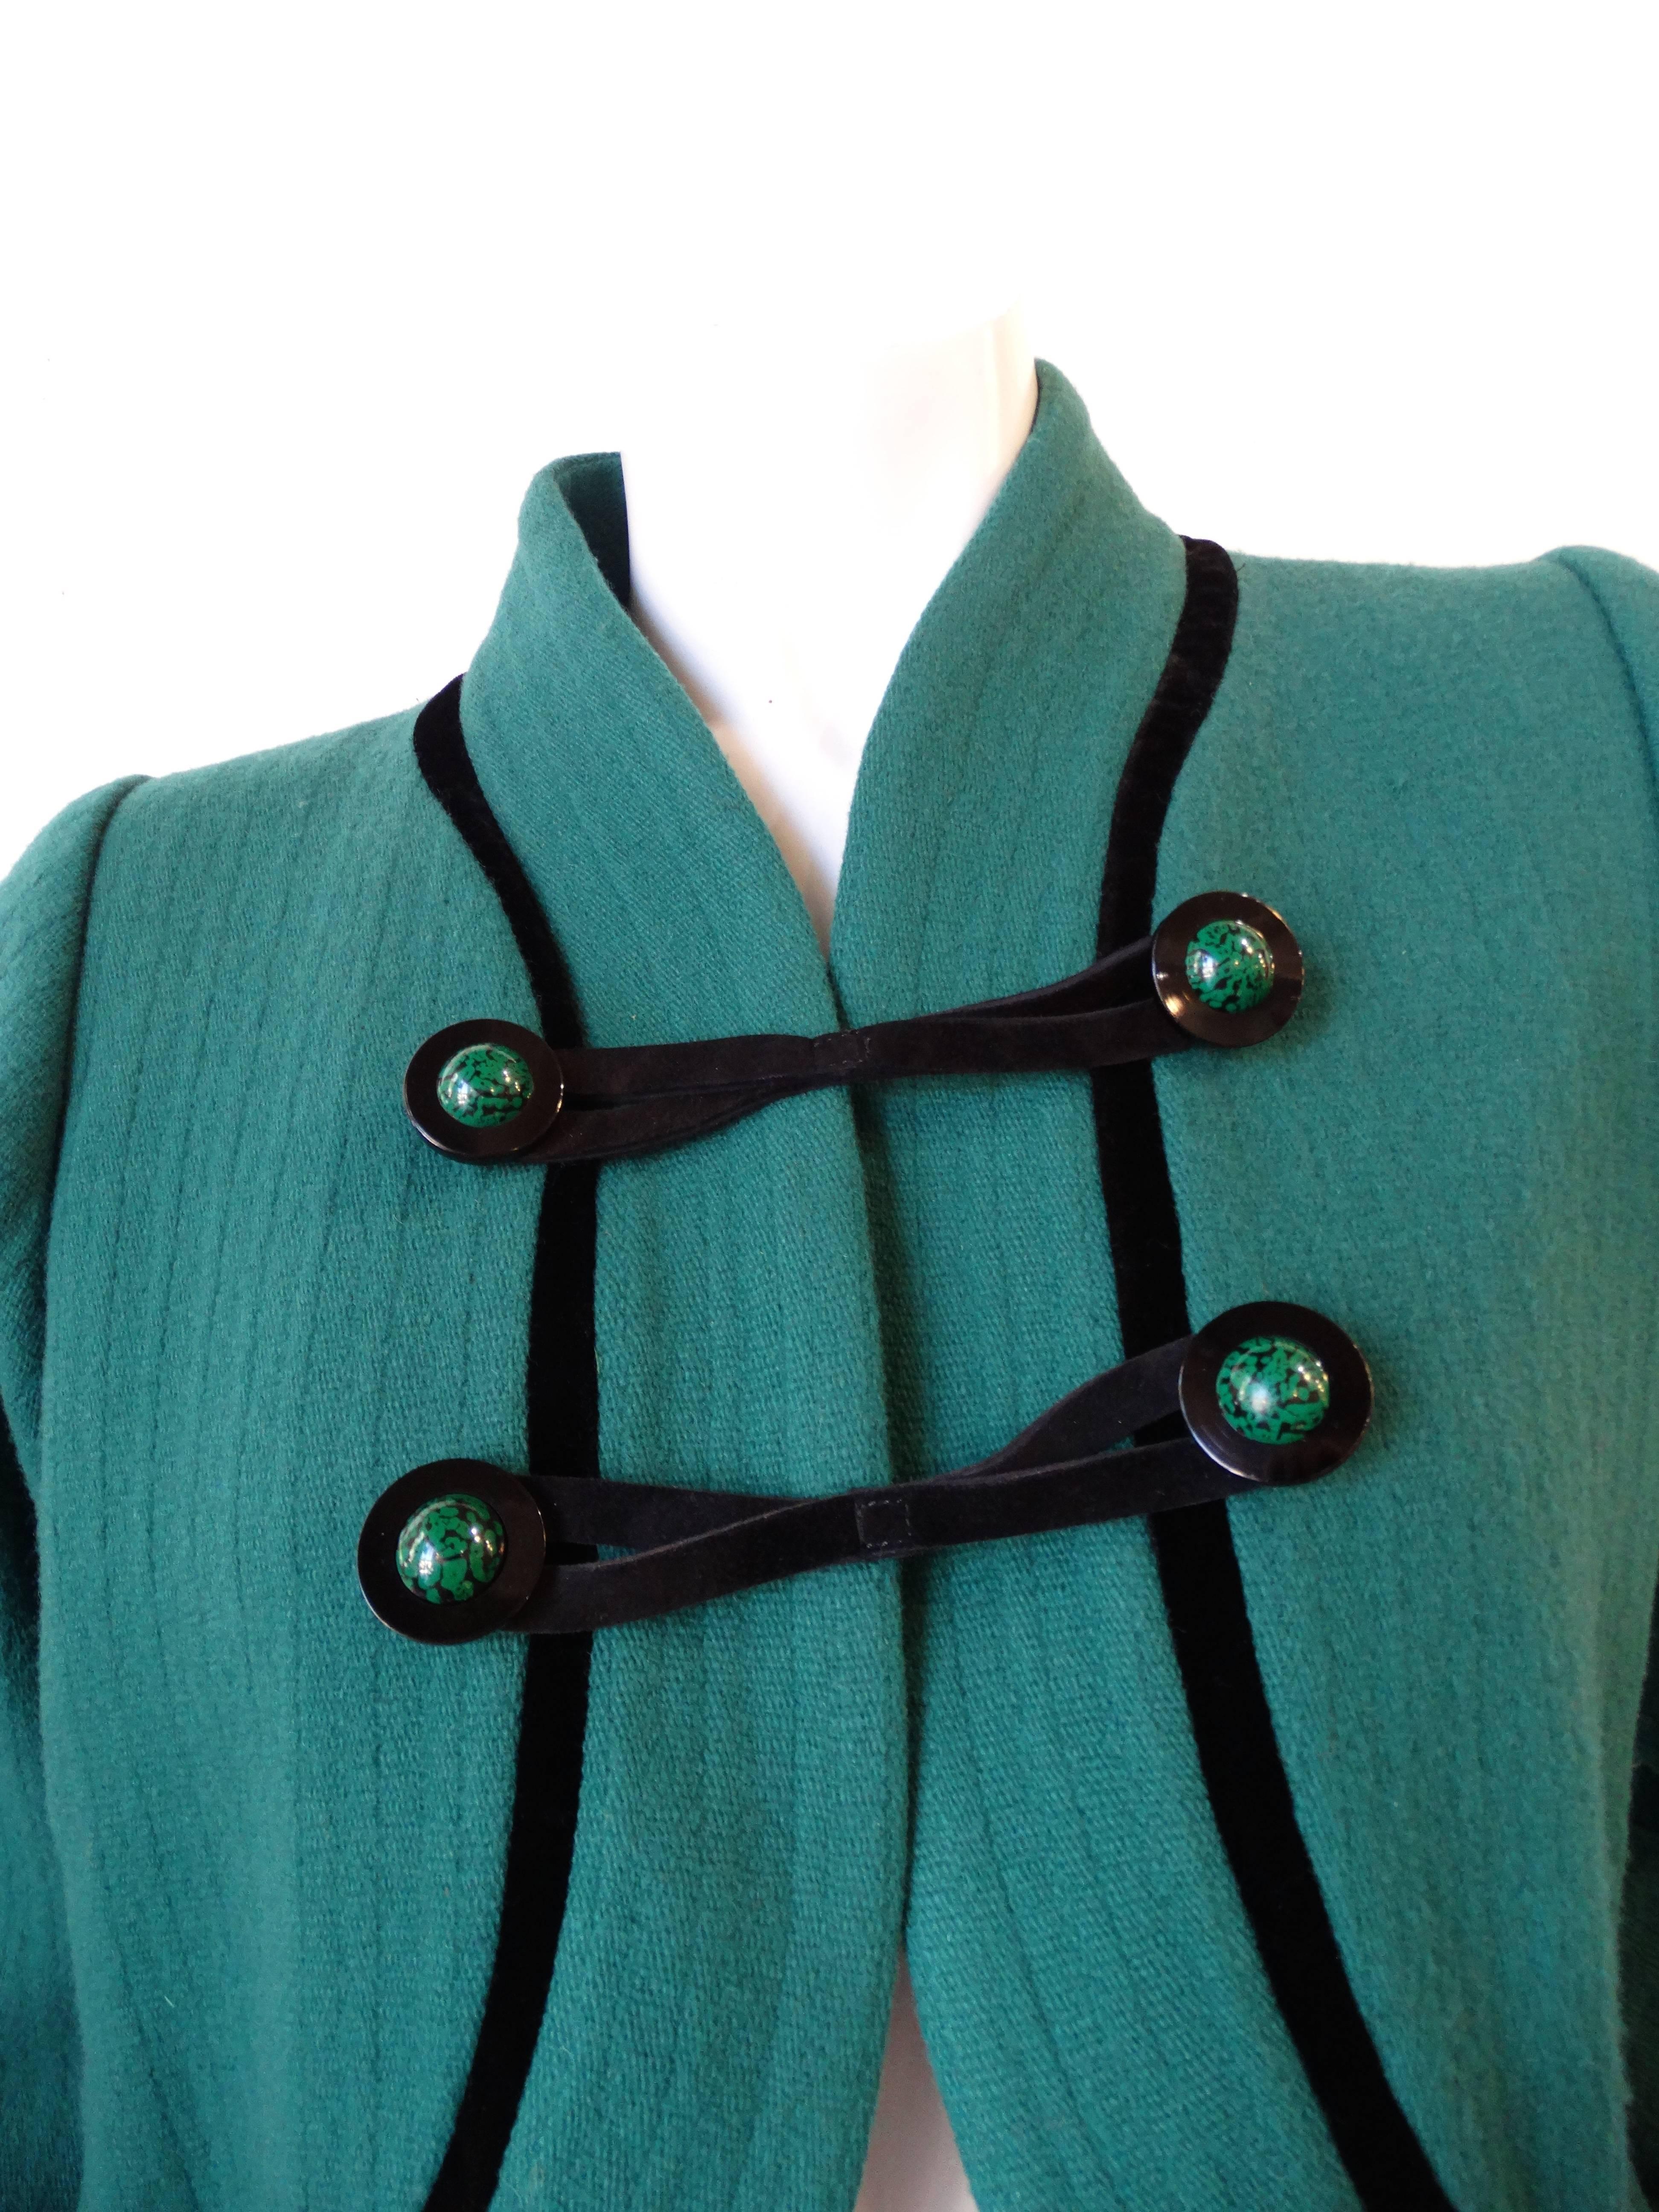 Nobody does outerwear quite like Yves Saint Laurent- and this Rive Gauche piece from the 1990s is no exception! Made of a super soft wool blend fabric in a fabulous jade green color! Trimmed with black piping along the bust and on the elasticized